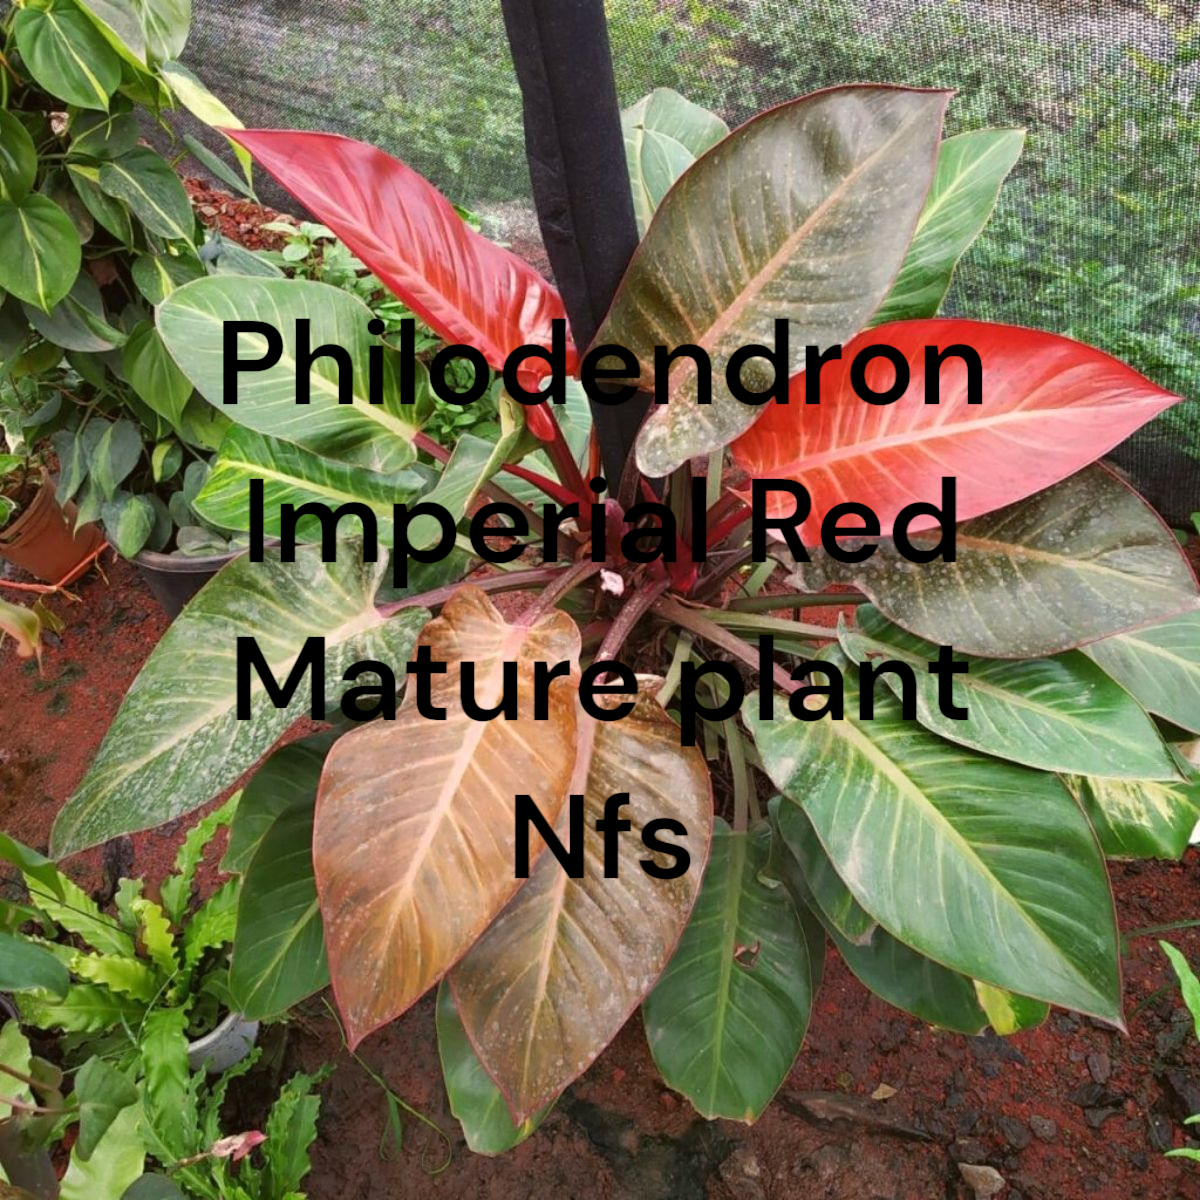 Philodendron Imperial Red Starter plants (2nd photo) Photos b4 Shipping